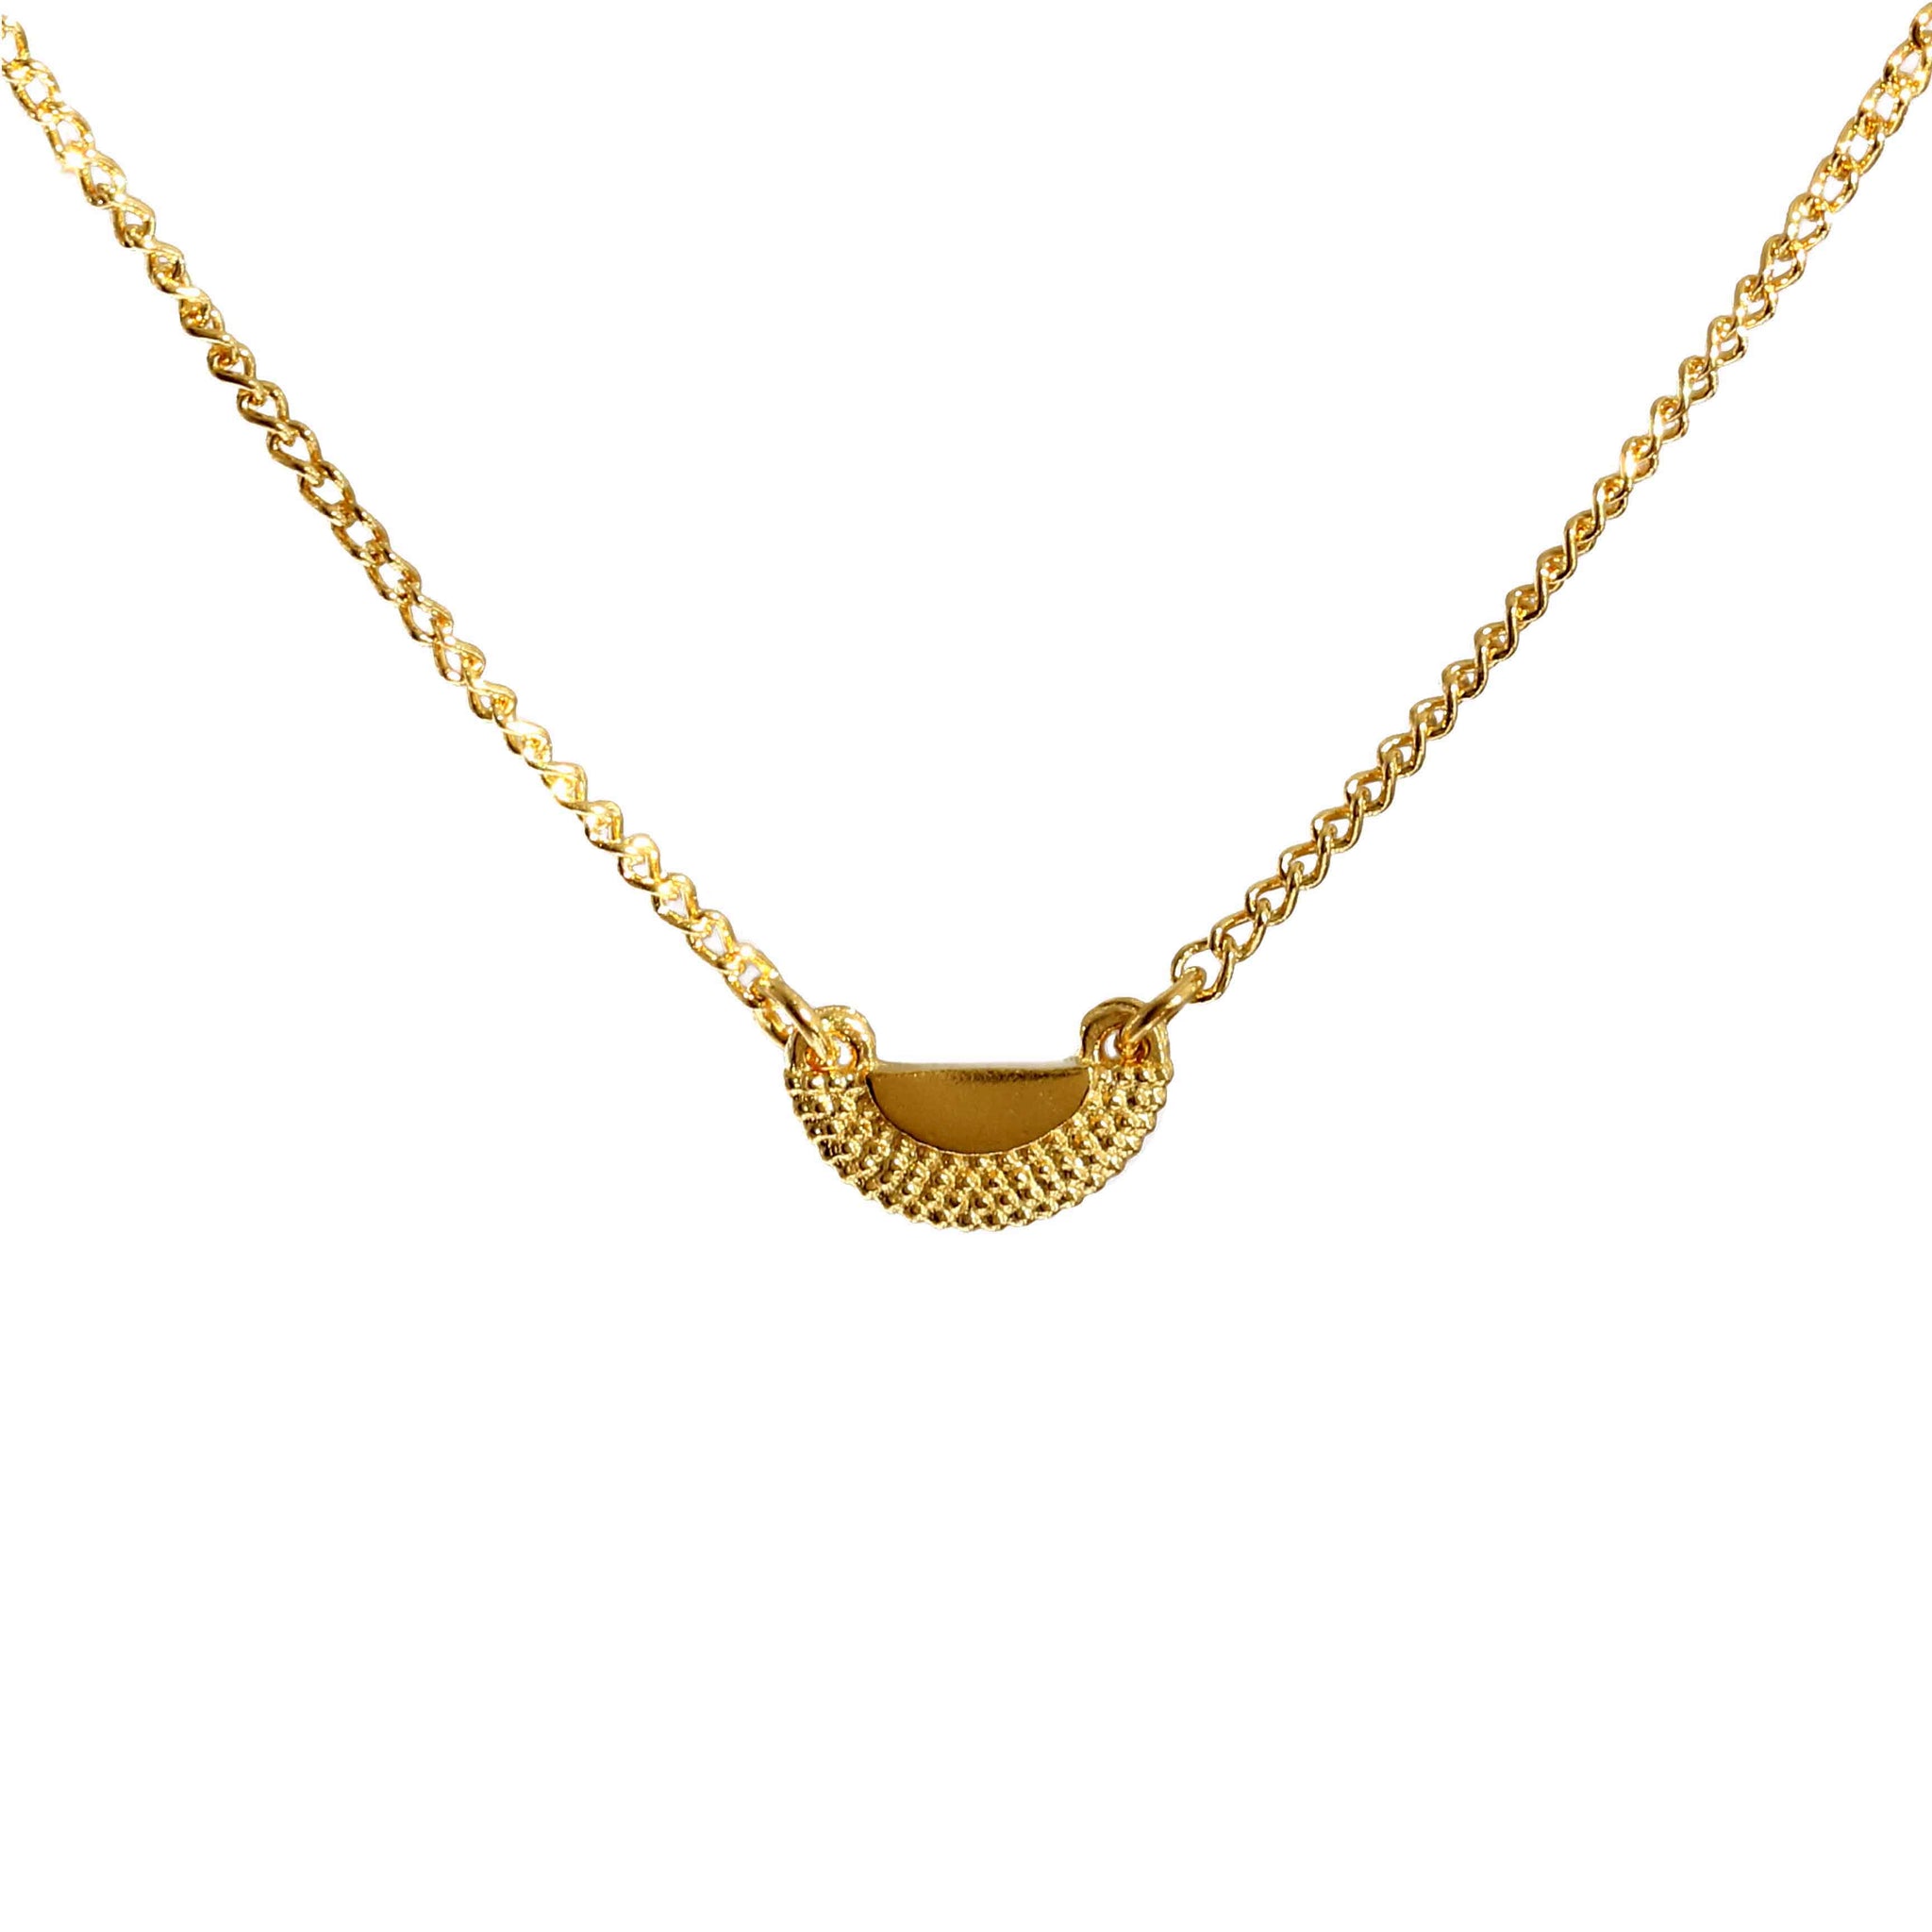 Ruptus Tiny Pendant Necklace in yellow gold